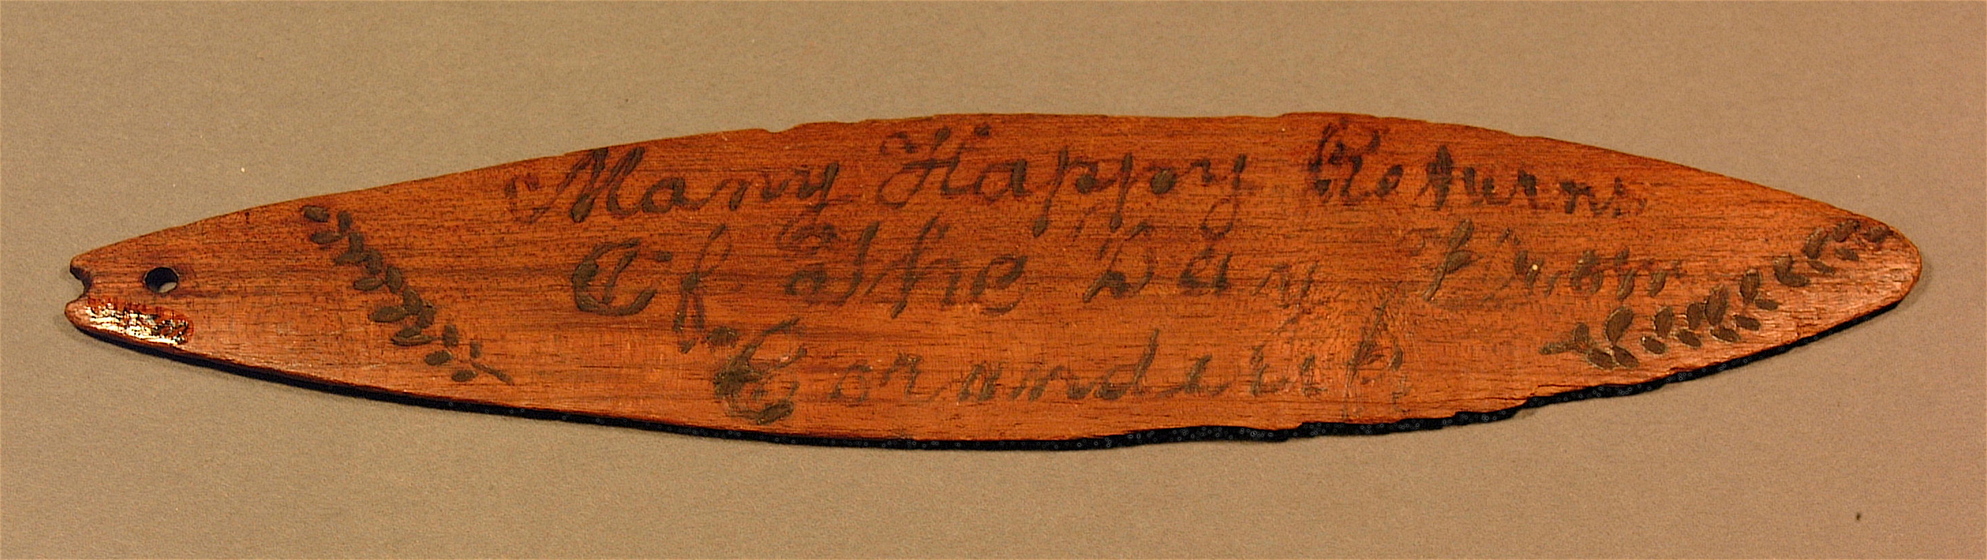 large, flat oval timber with stylised writing